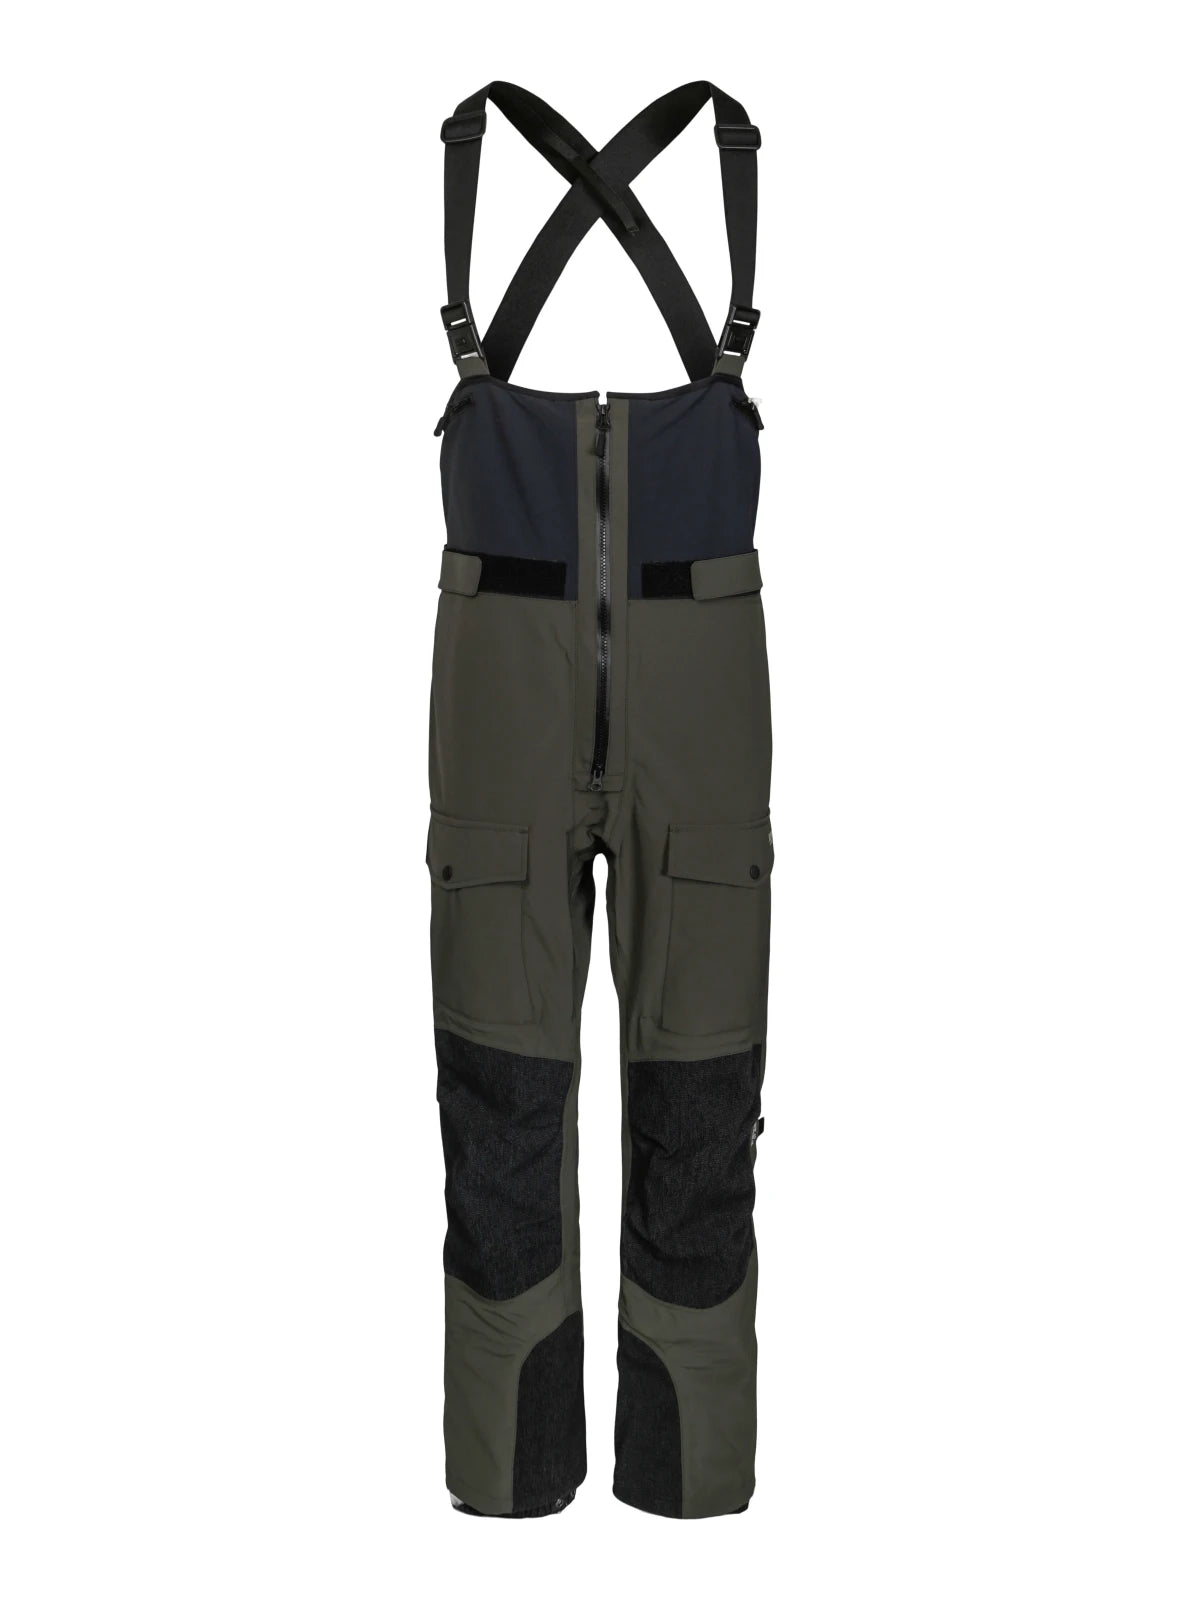 Brynje, Expedition Pants 2.0 M's, Charcoal green